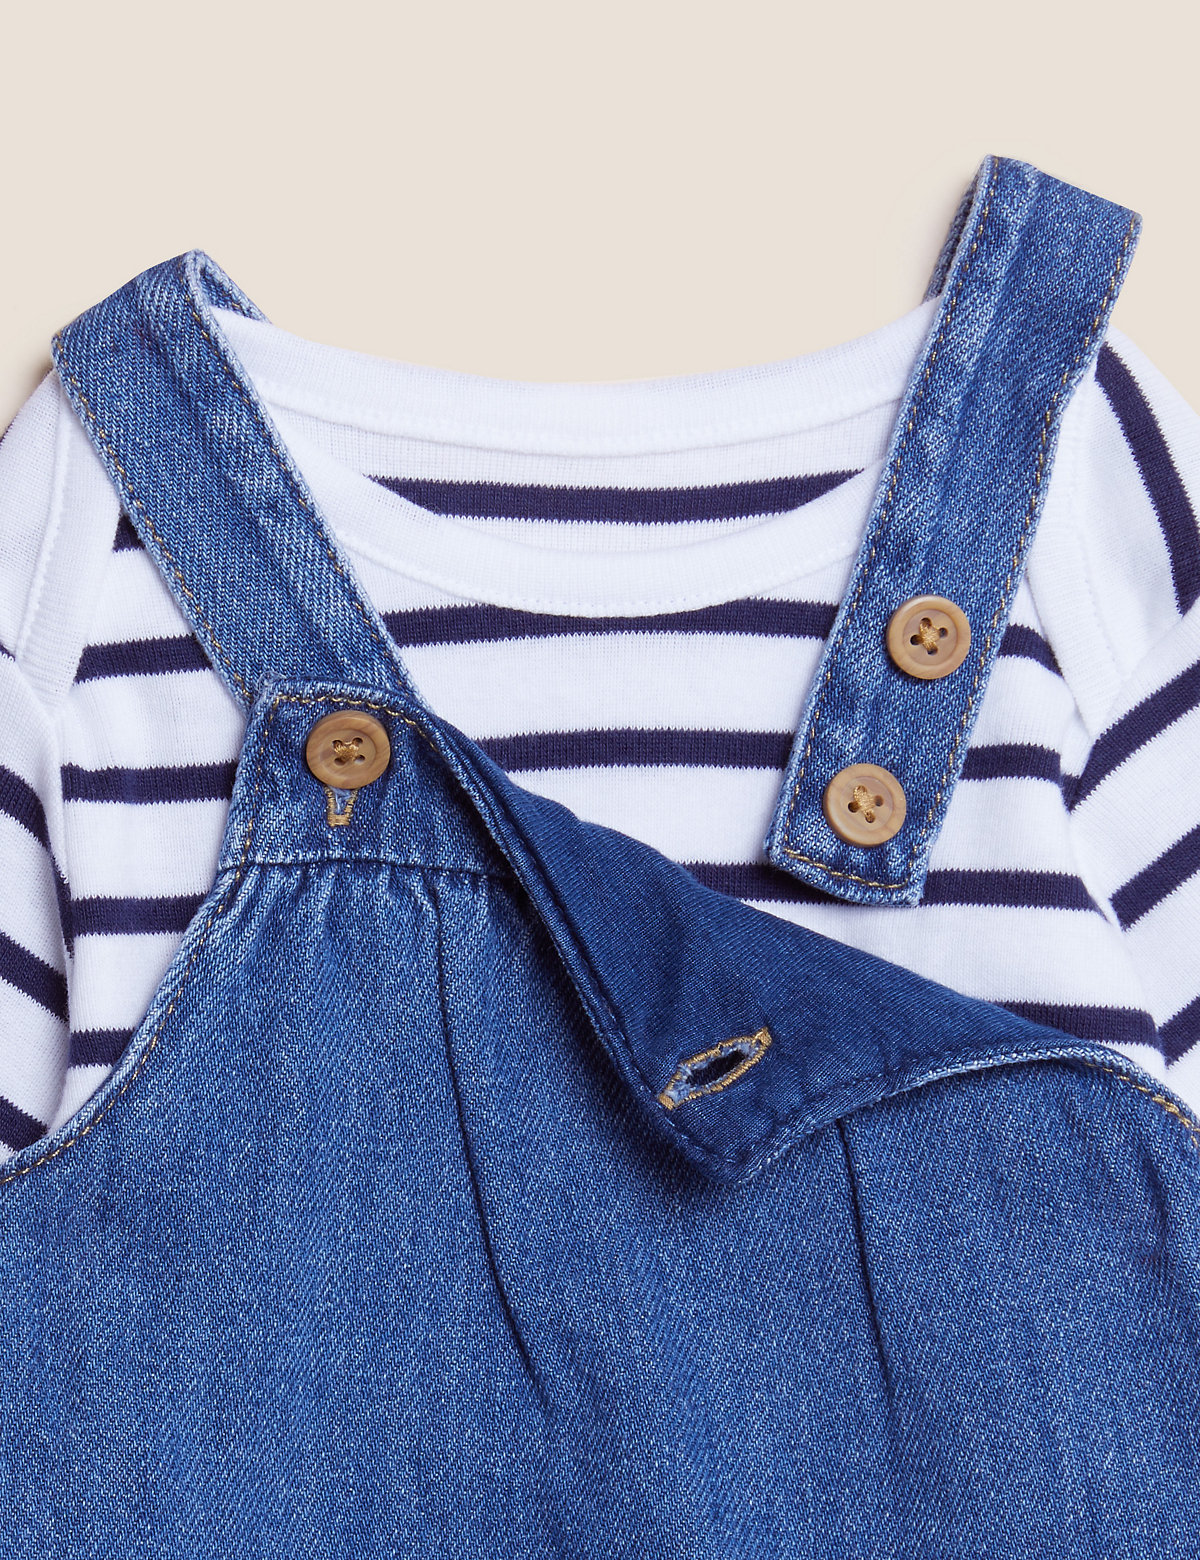 2pc Pure Cotton Denim Pinny Outfit (0-3 Yrs)